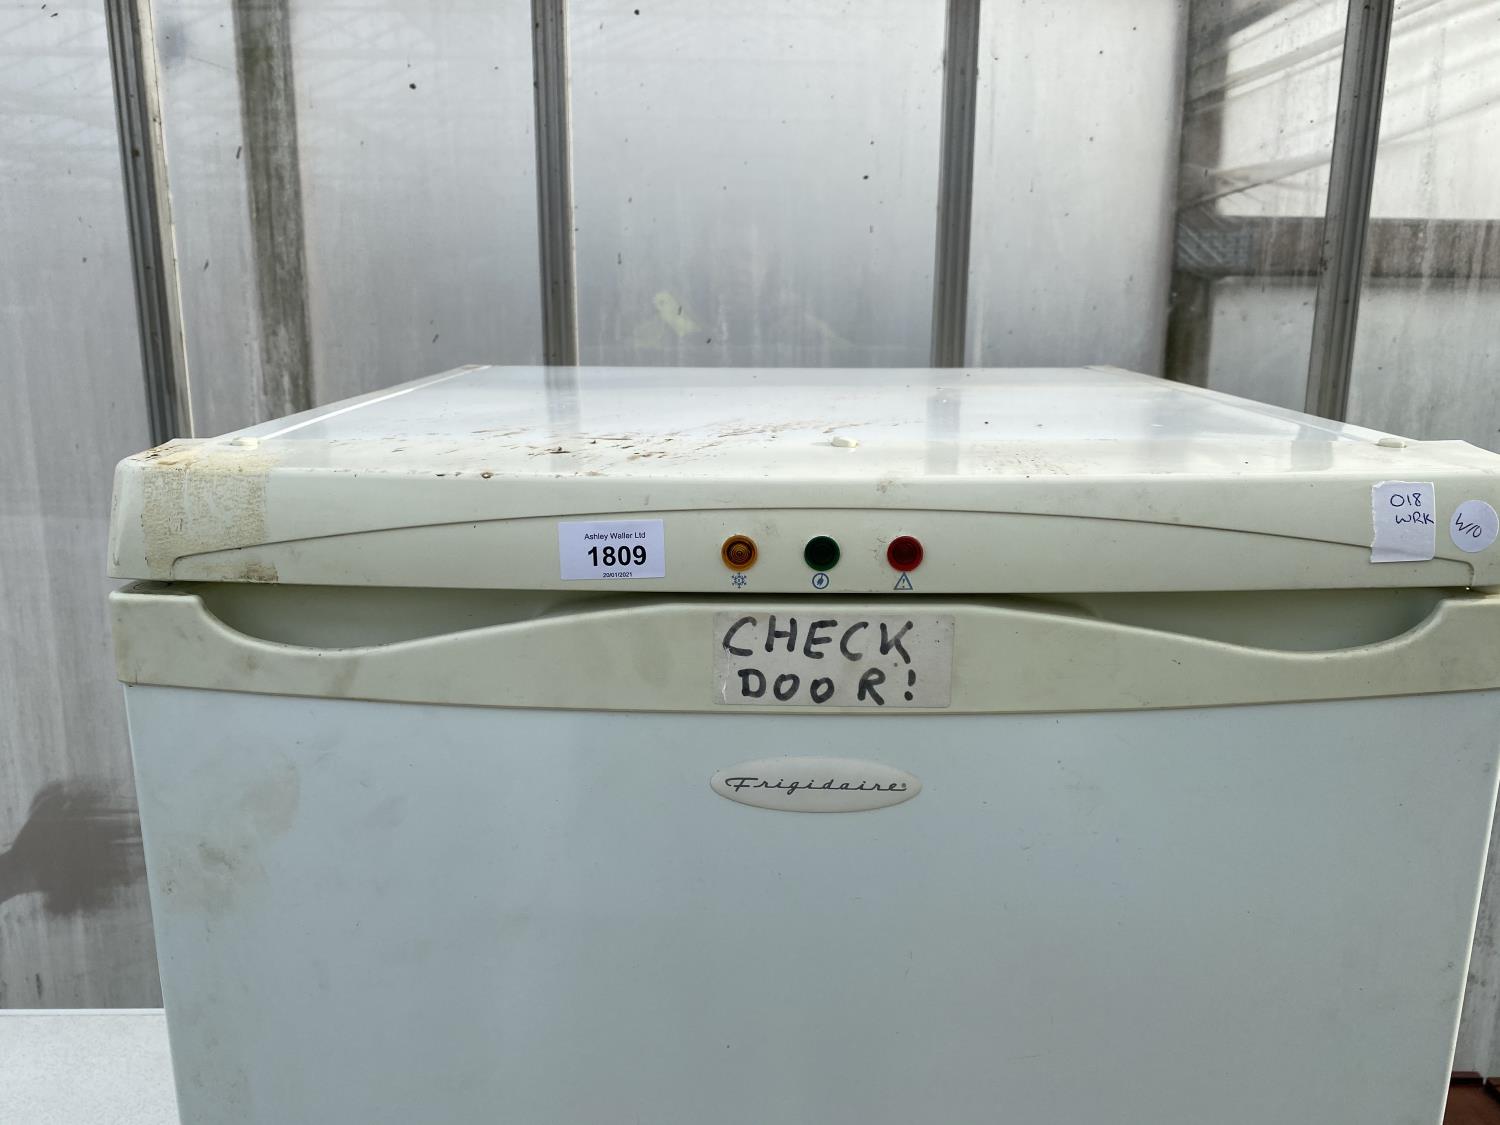 A WHITE FRIGIDAIRE UPRIGHT FREEZER BELIEVED IN WORKING IORDER BUT NO WARRANTY - Image 2 of 6